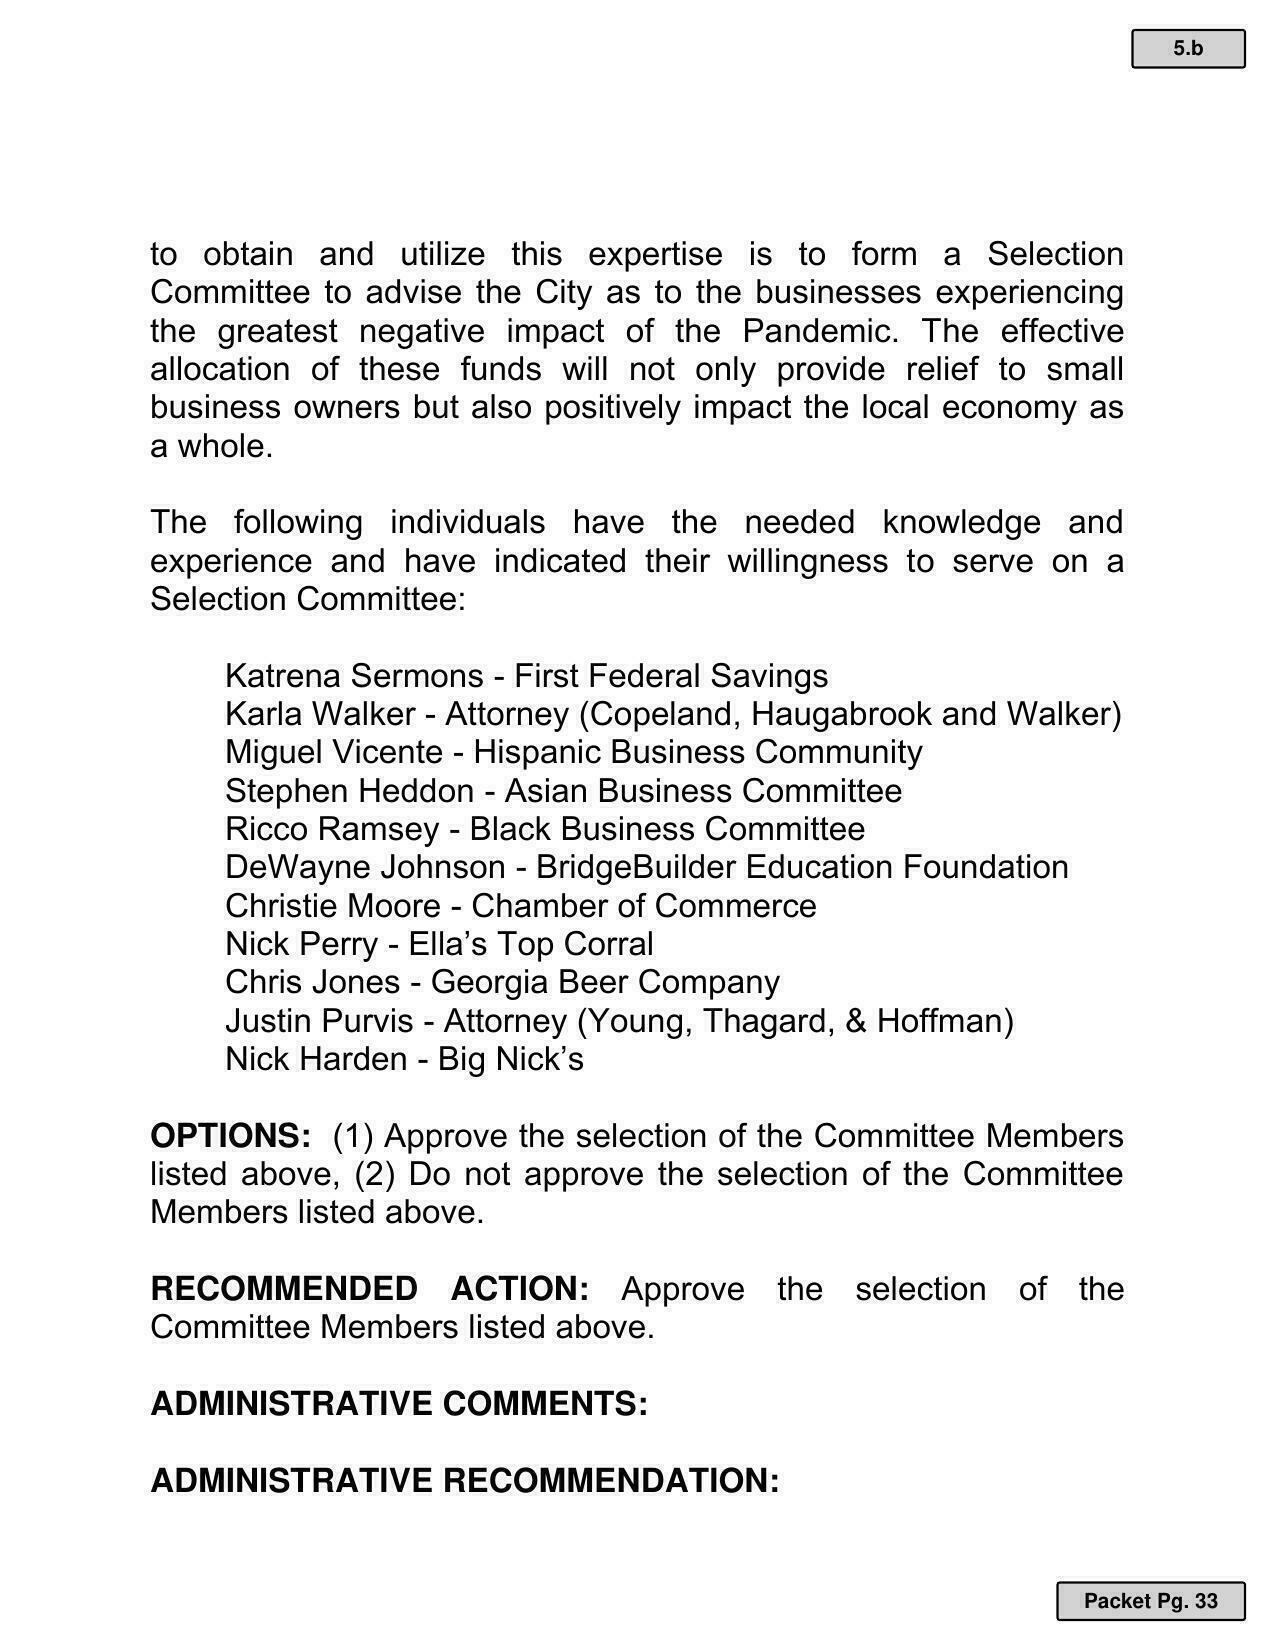 Candidates for Small Business Selection Committee